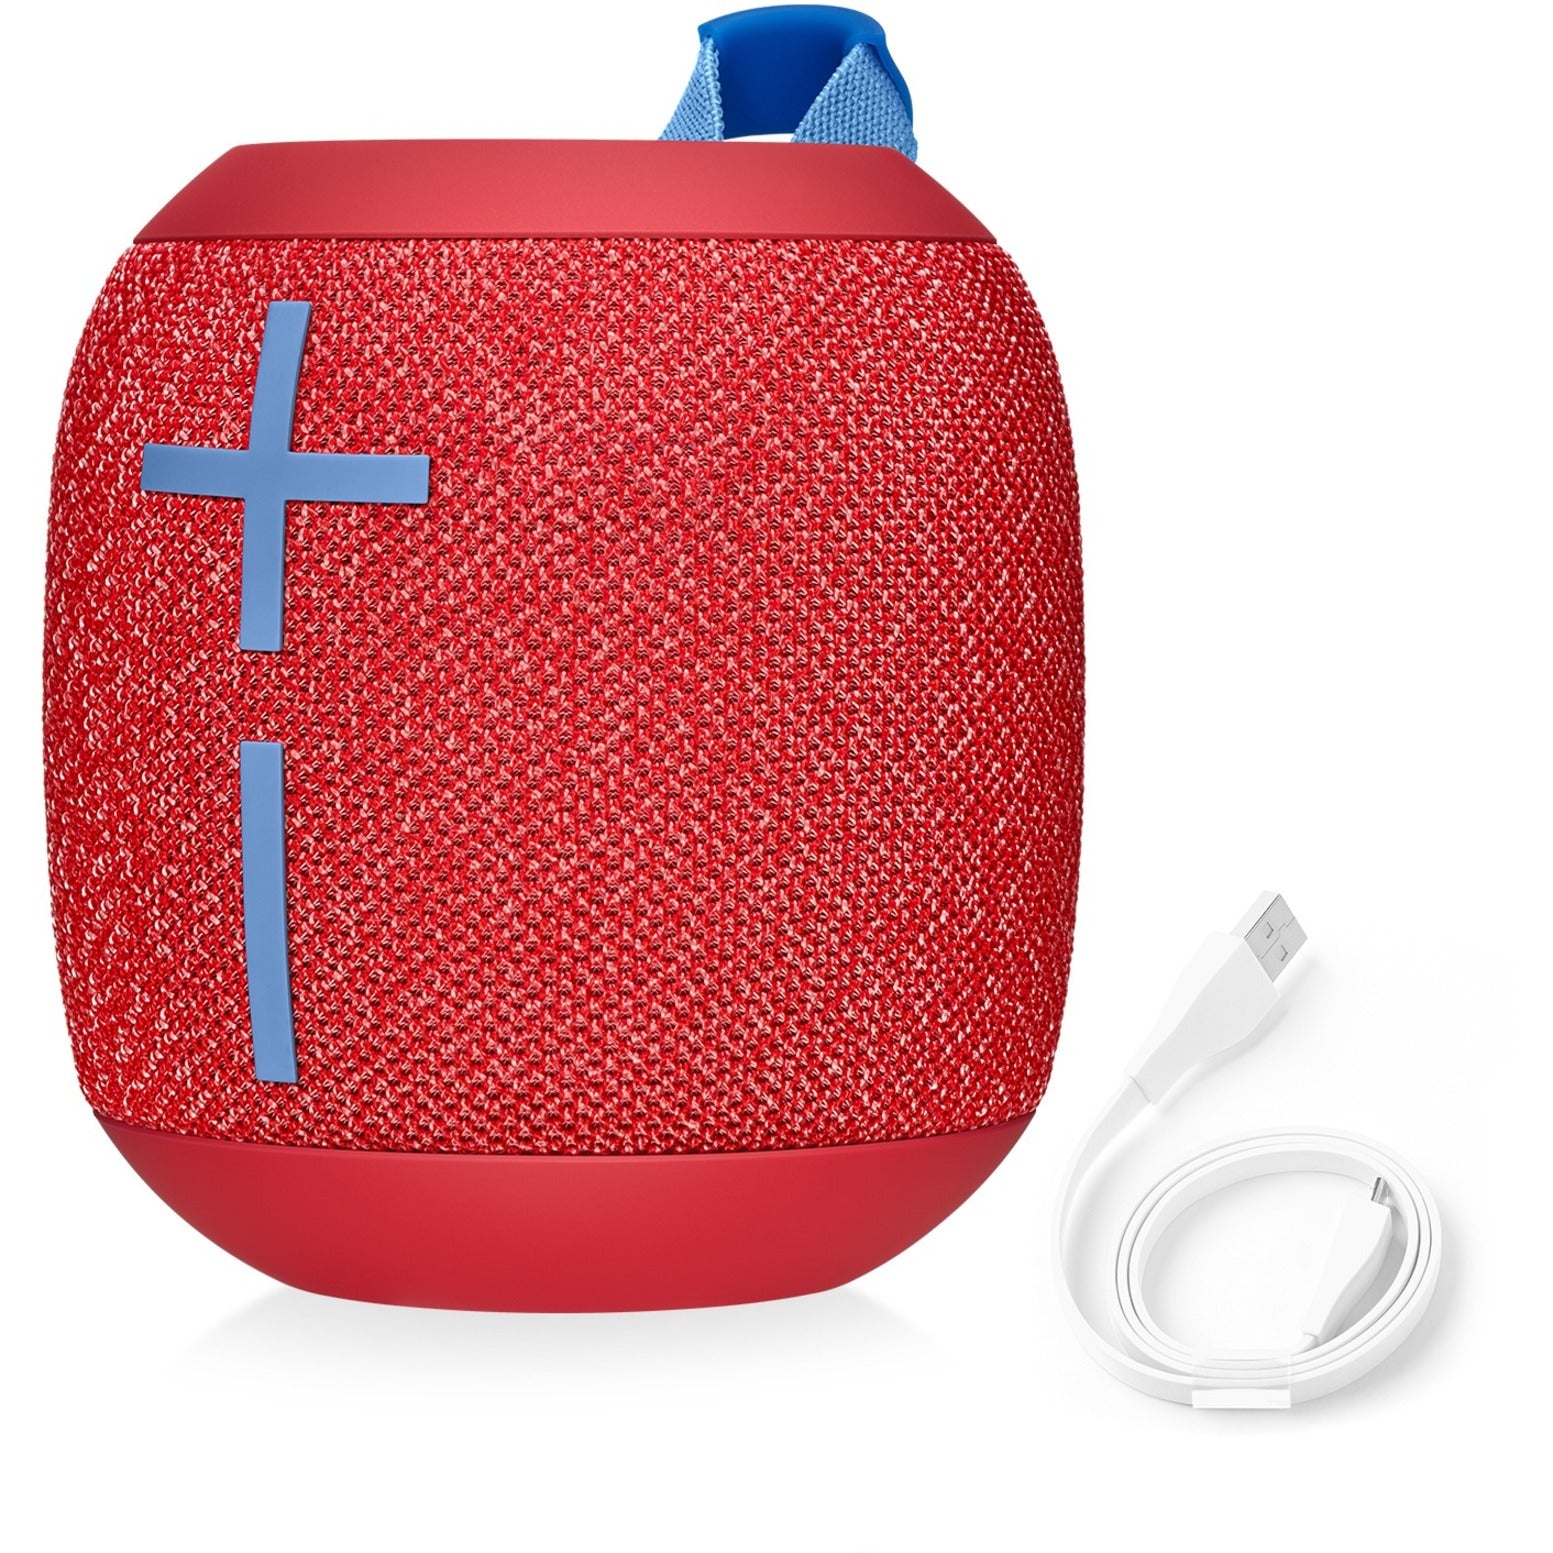 Ultimate Ears 984-001549 WONDERBOOM 2 Speaker System, Radical Red. Portable Wireless Speaker with 360° Circle Sound, Outdoor Boost, and 2-Year Warranty